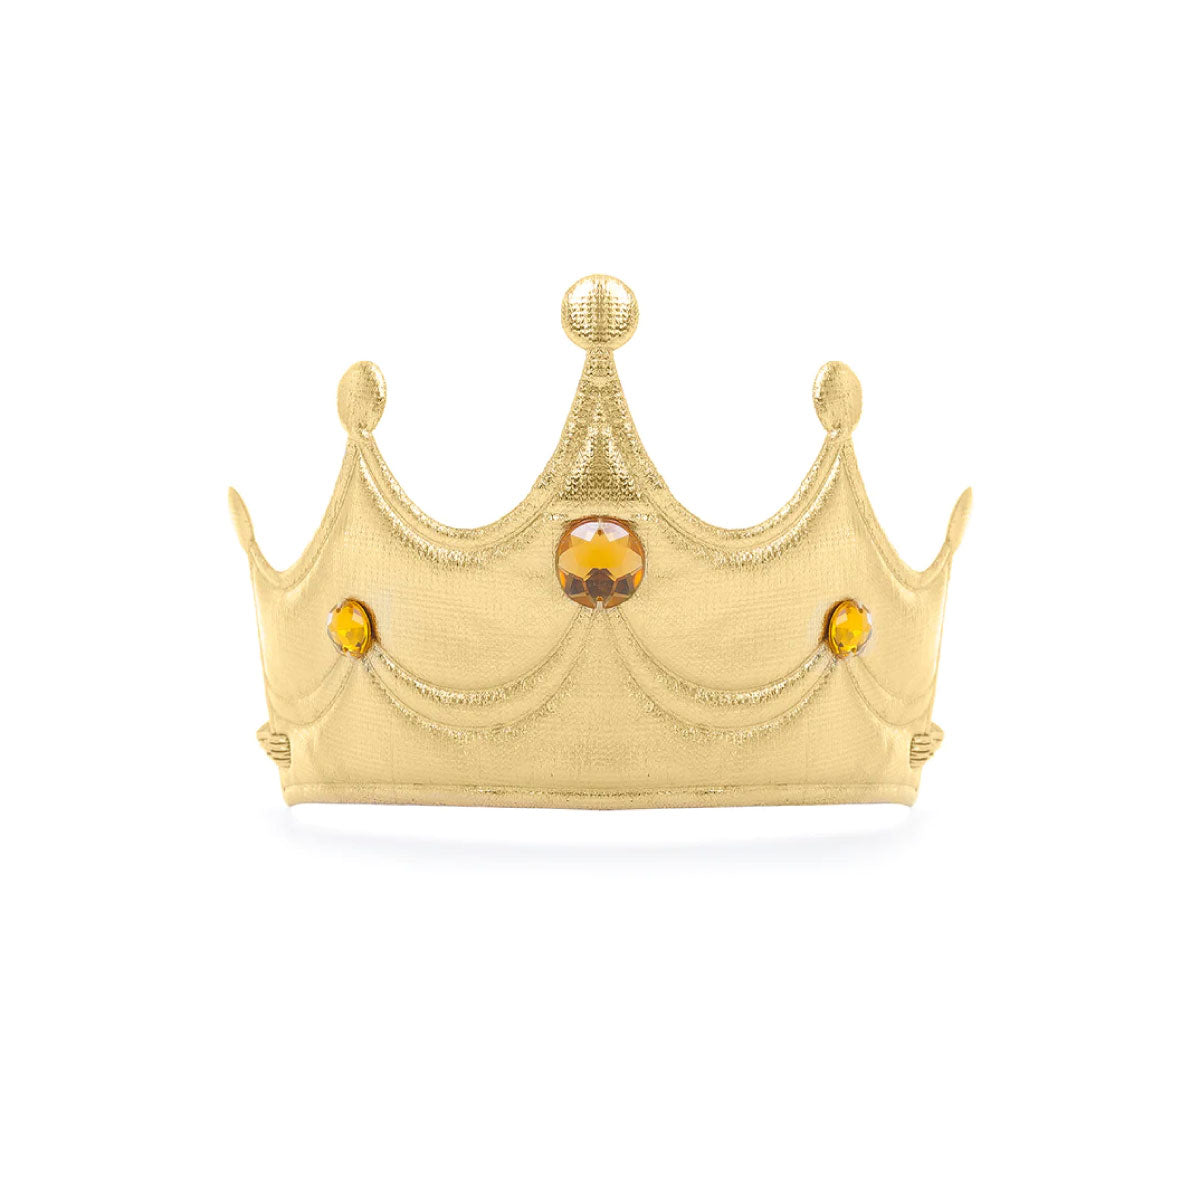 Gold Princess Soft Crown from Little Adventures